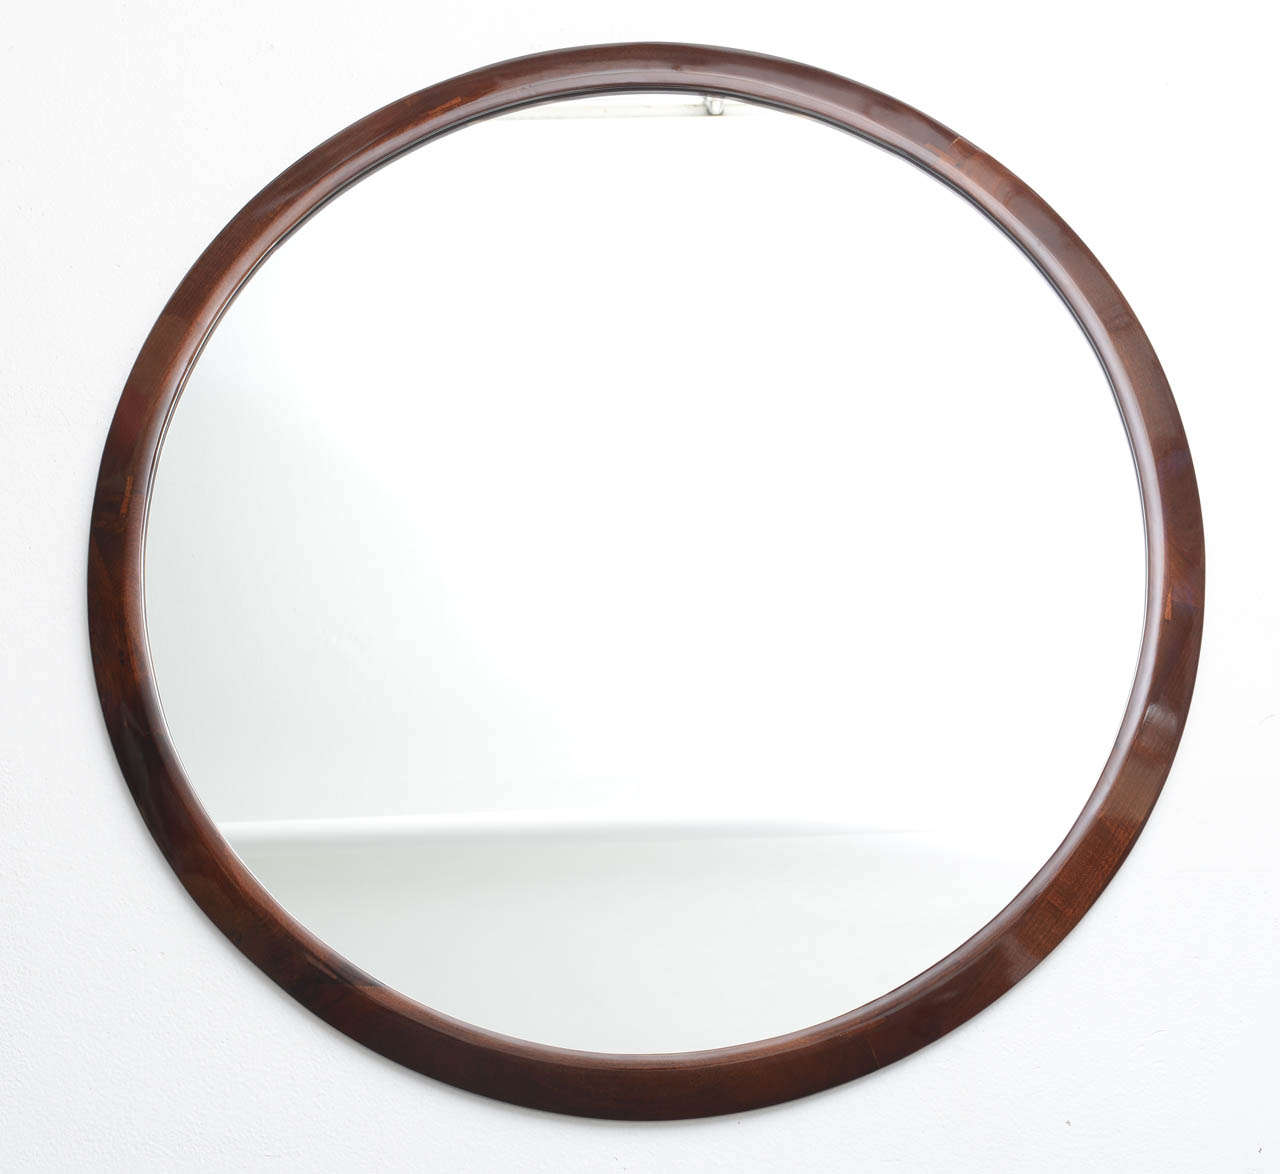 This handsome Art Deco style large-scale mirror was created in the 1930s in France. The beveled-frame is in mahogany wood with a clear varnish which catches the light and gives the piece great movement.

Please feel free to contact us directly for